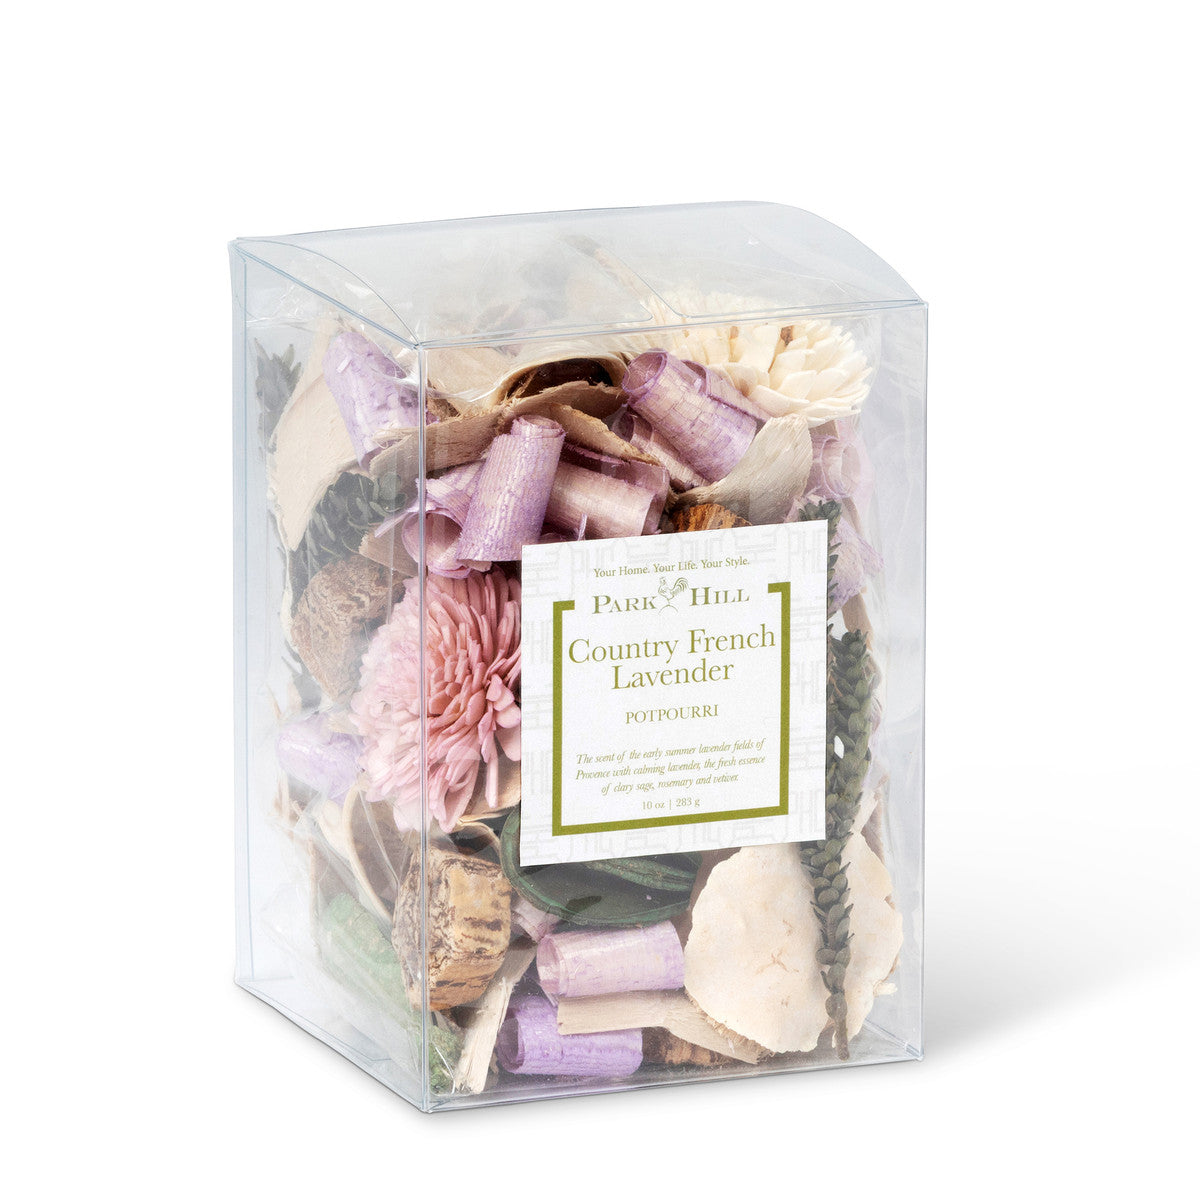 Country French Lavender Potpourri